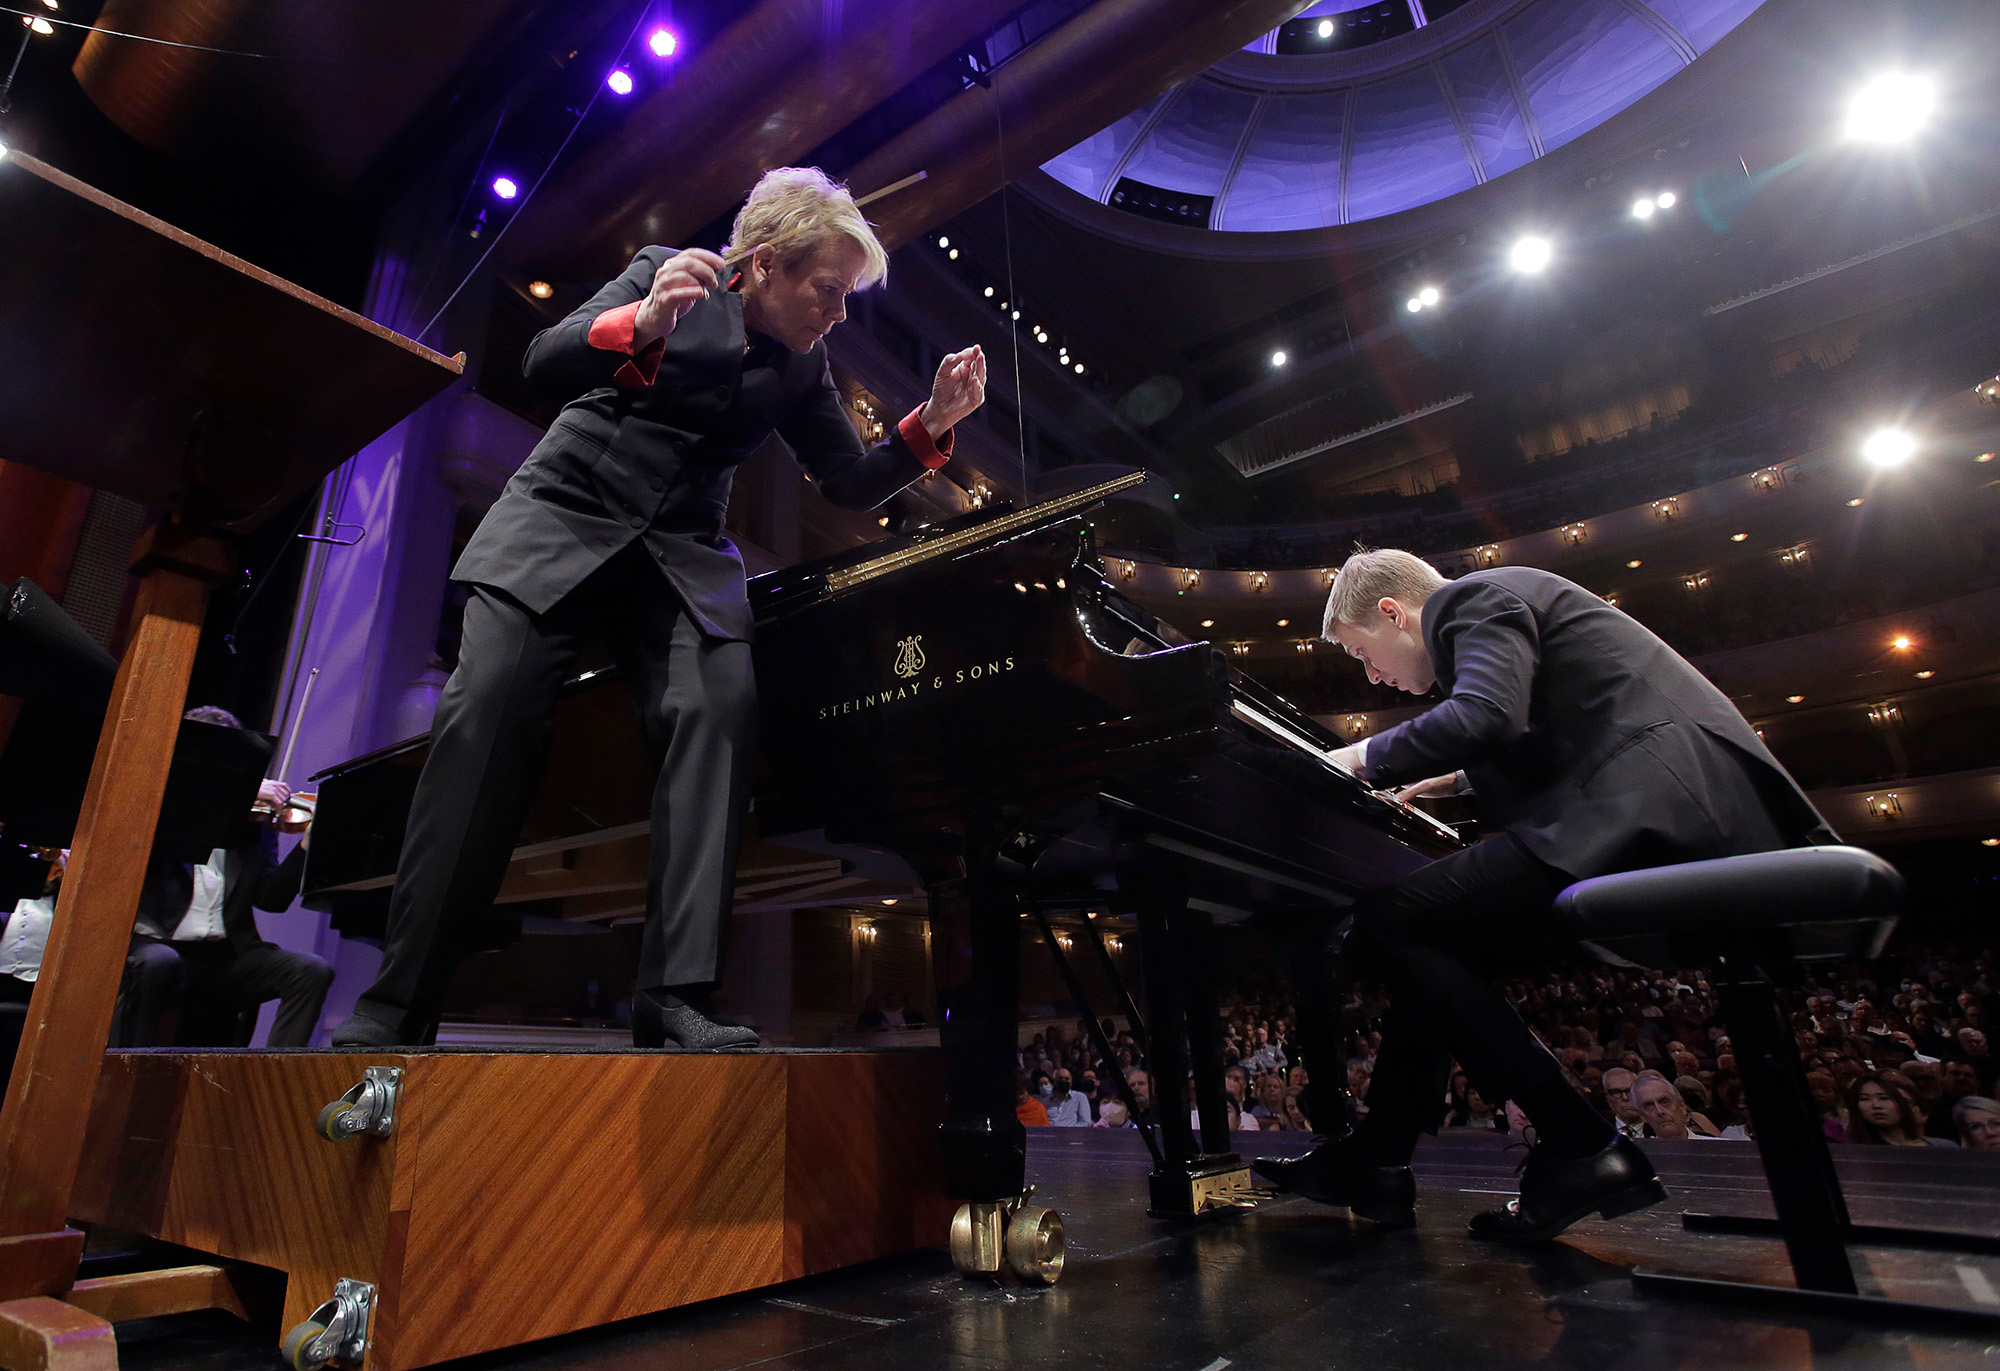 Dmytro hunches intensely over the keys of a piano in a crowded concert hall as the conductor in action peers around the piano to look